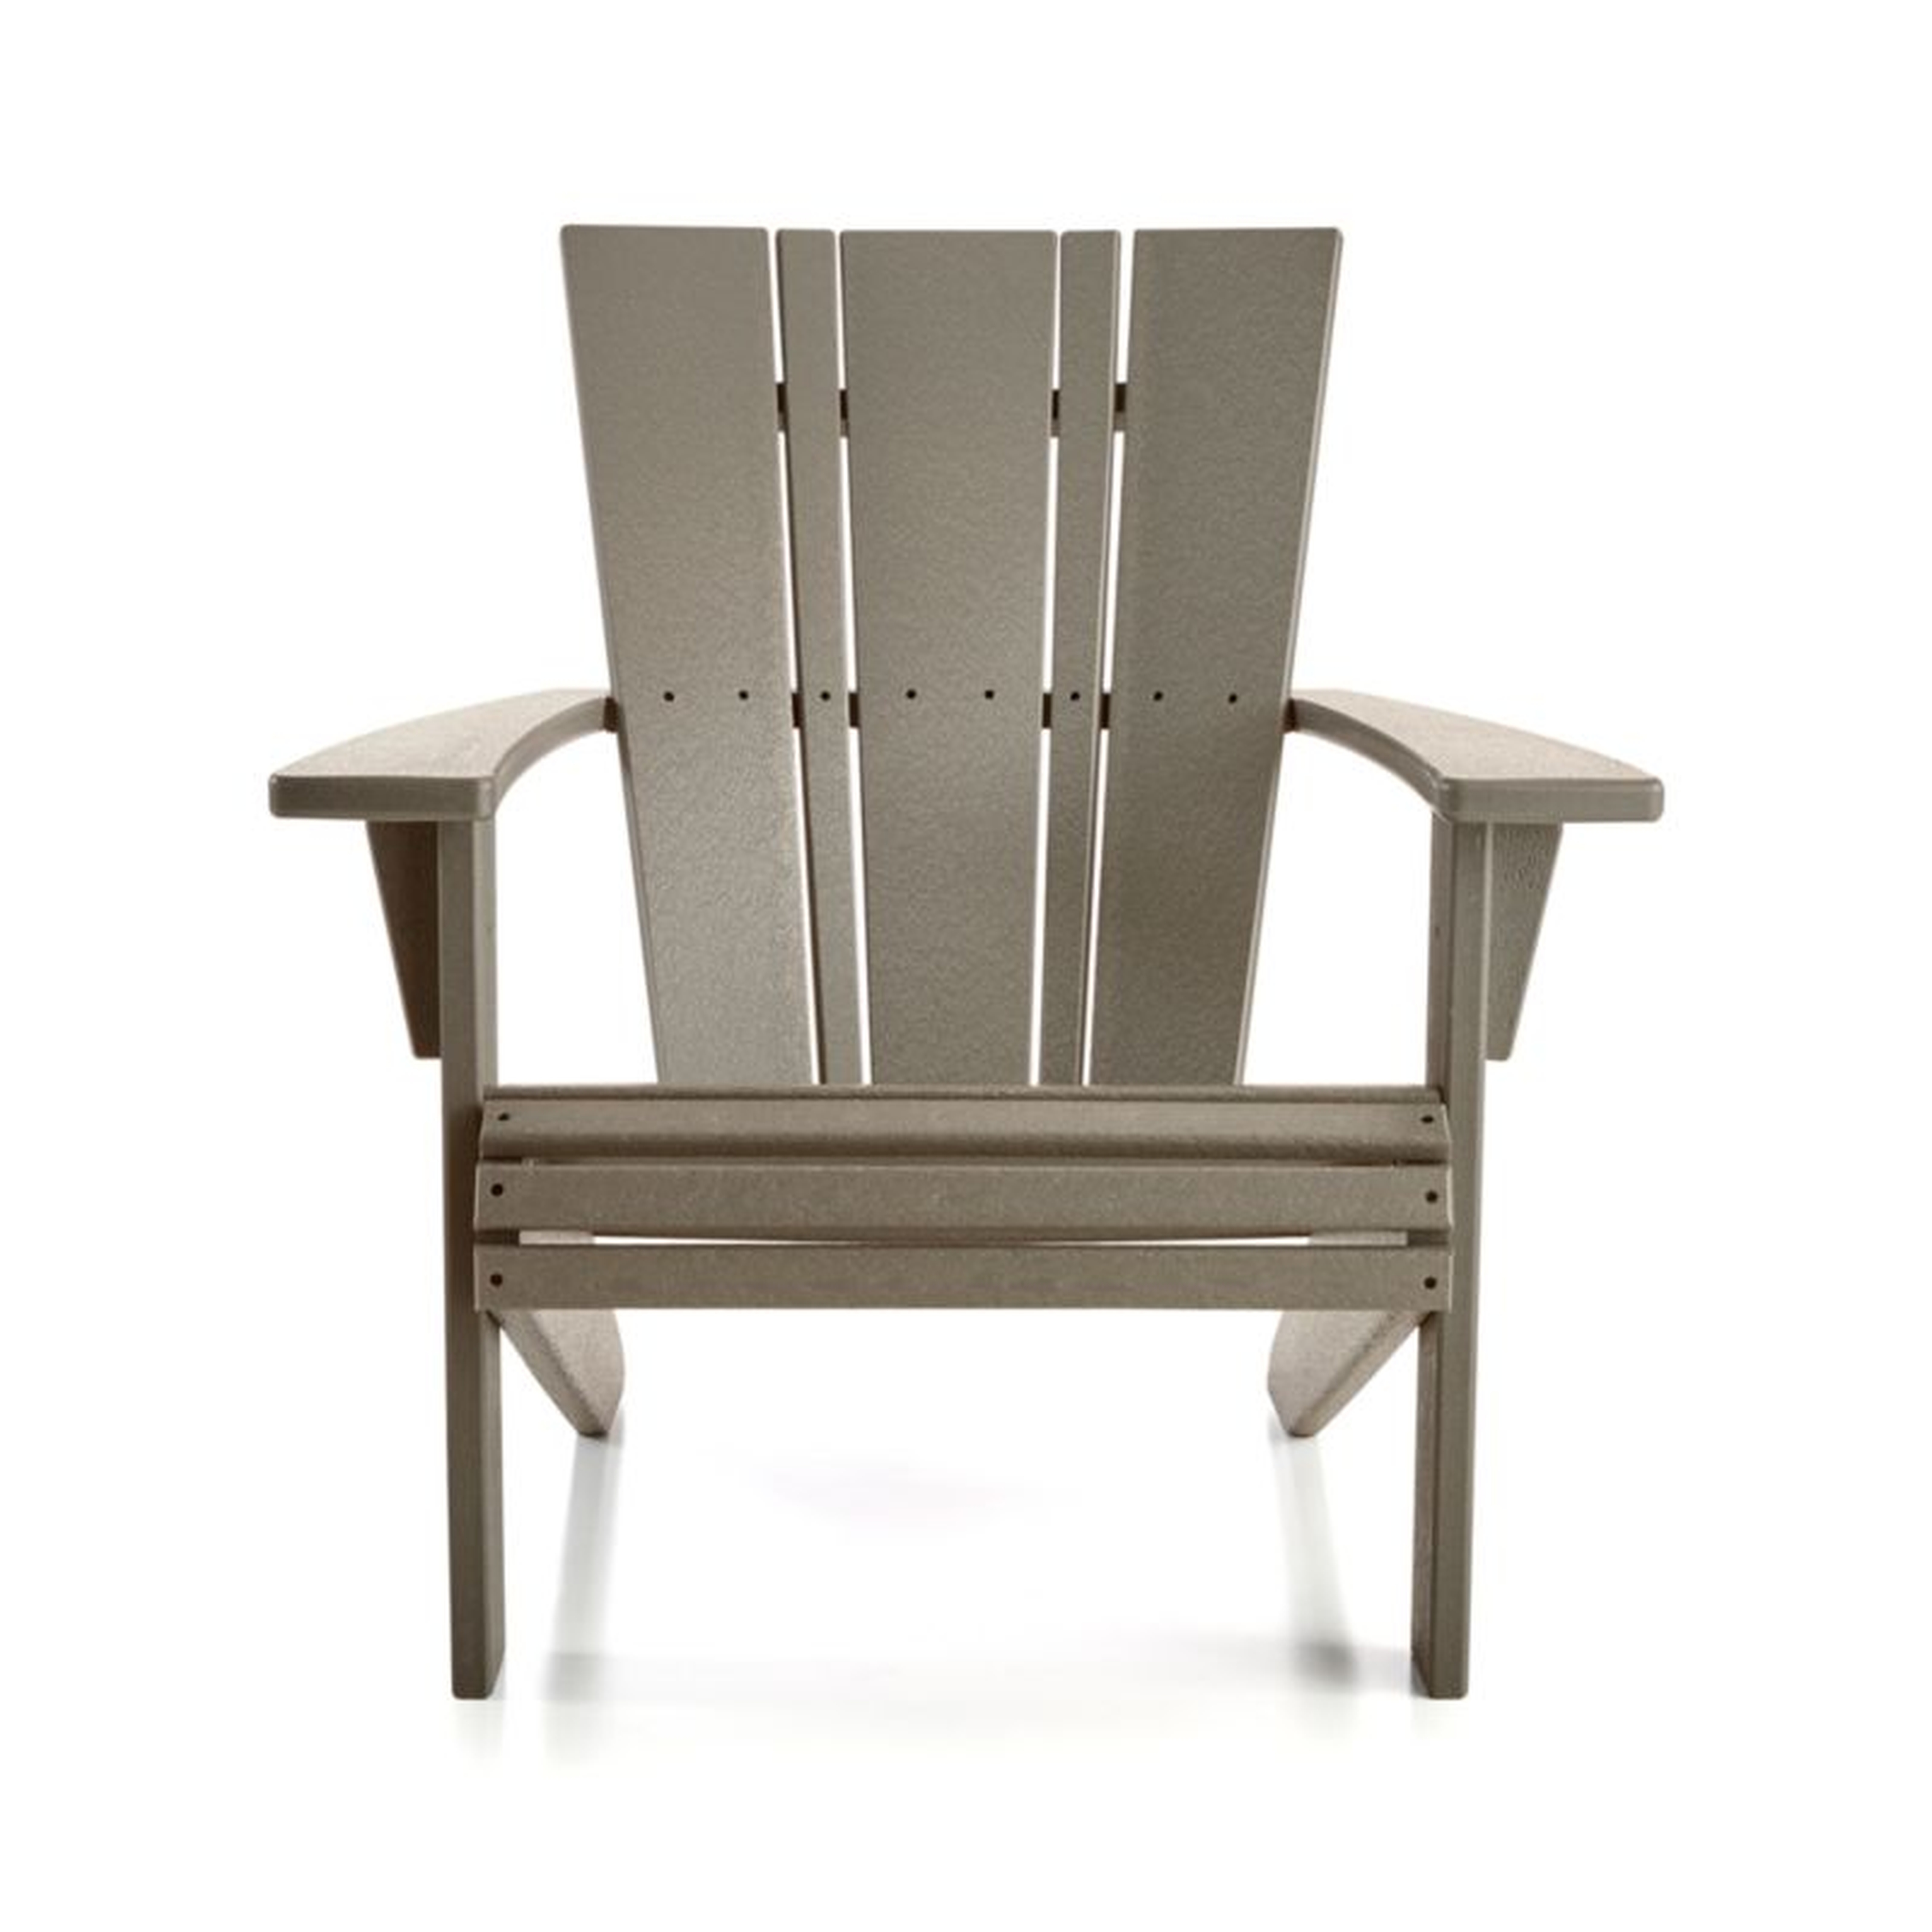 Vista II Slate Grey Outdoor Adirondack Chair by POLYWOOD® - Crate and Barrel